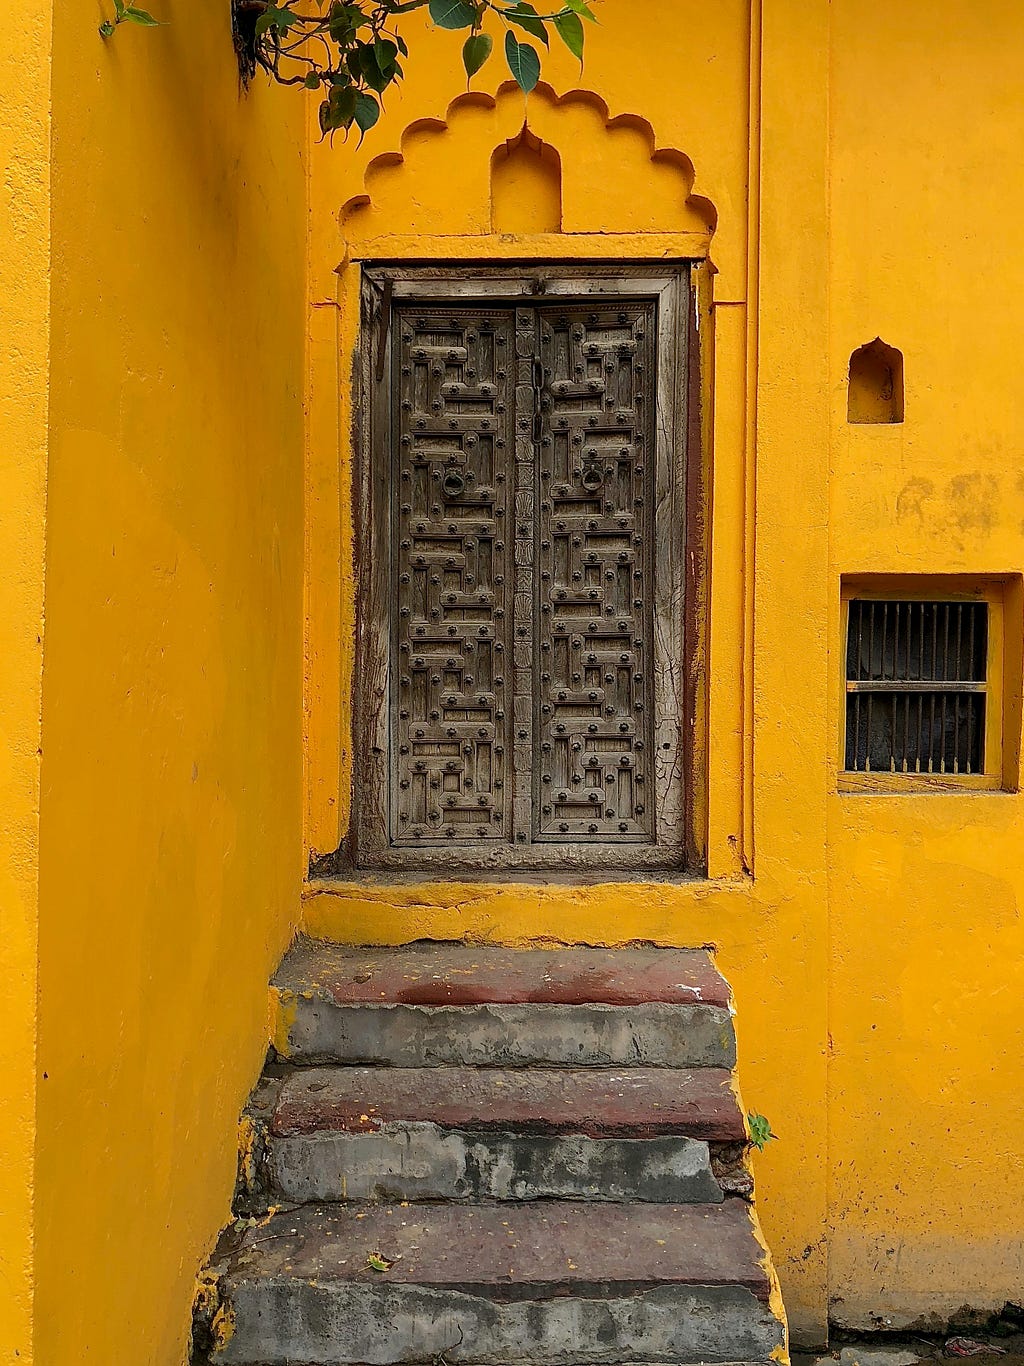 A closed wooden door against a yellow wall.